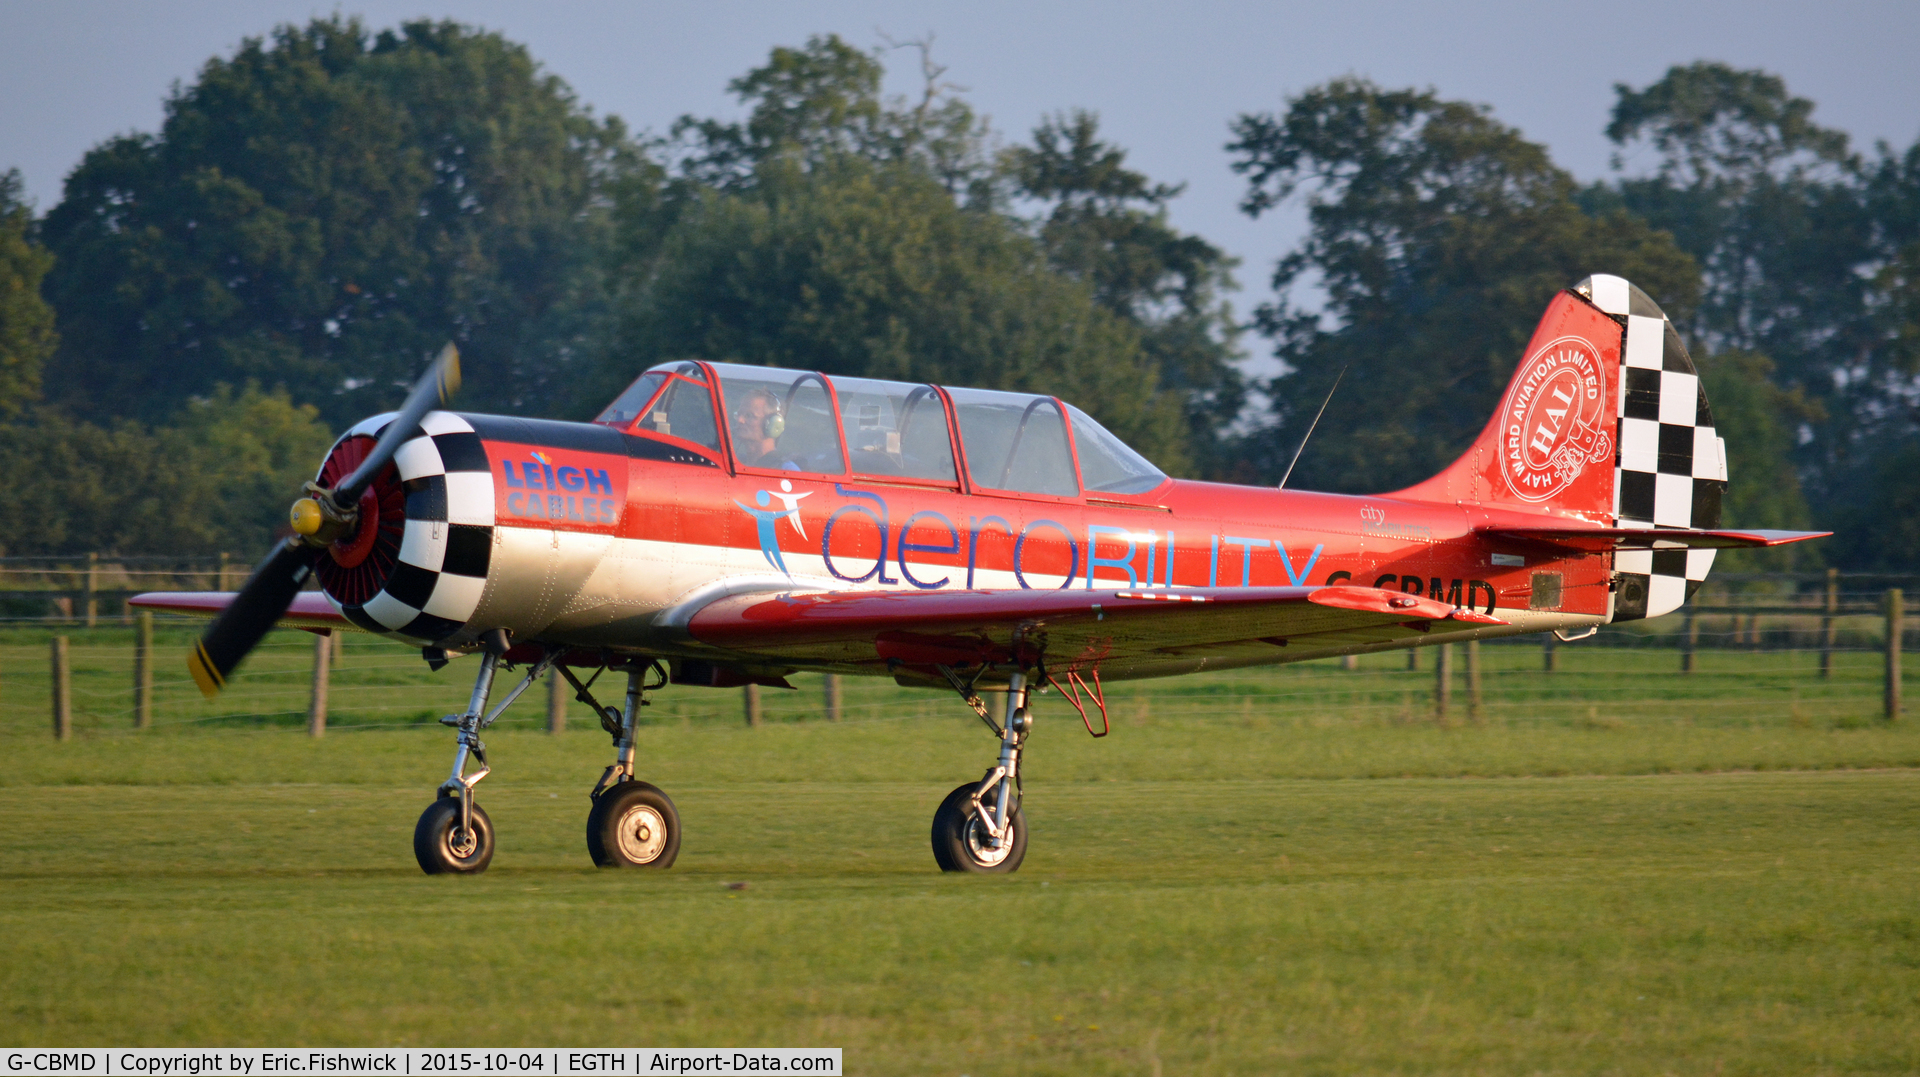 G-CBMD, 1982 Bacau Yak-52 C/N 822710, 3. G-CBMD at The Shuttleworth 'Uncovered' Airshow (Finale,) Oct. 2015.